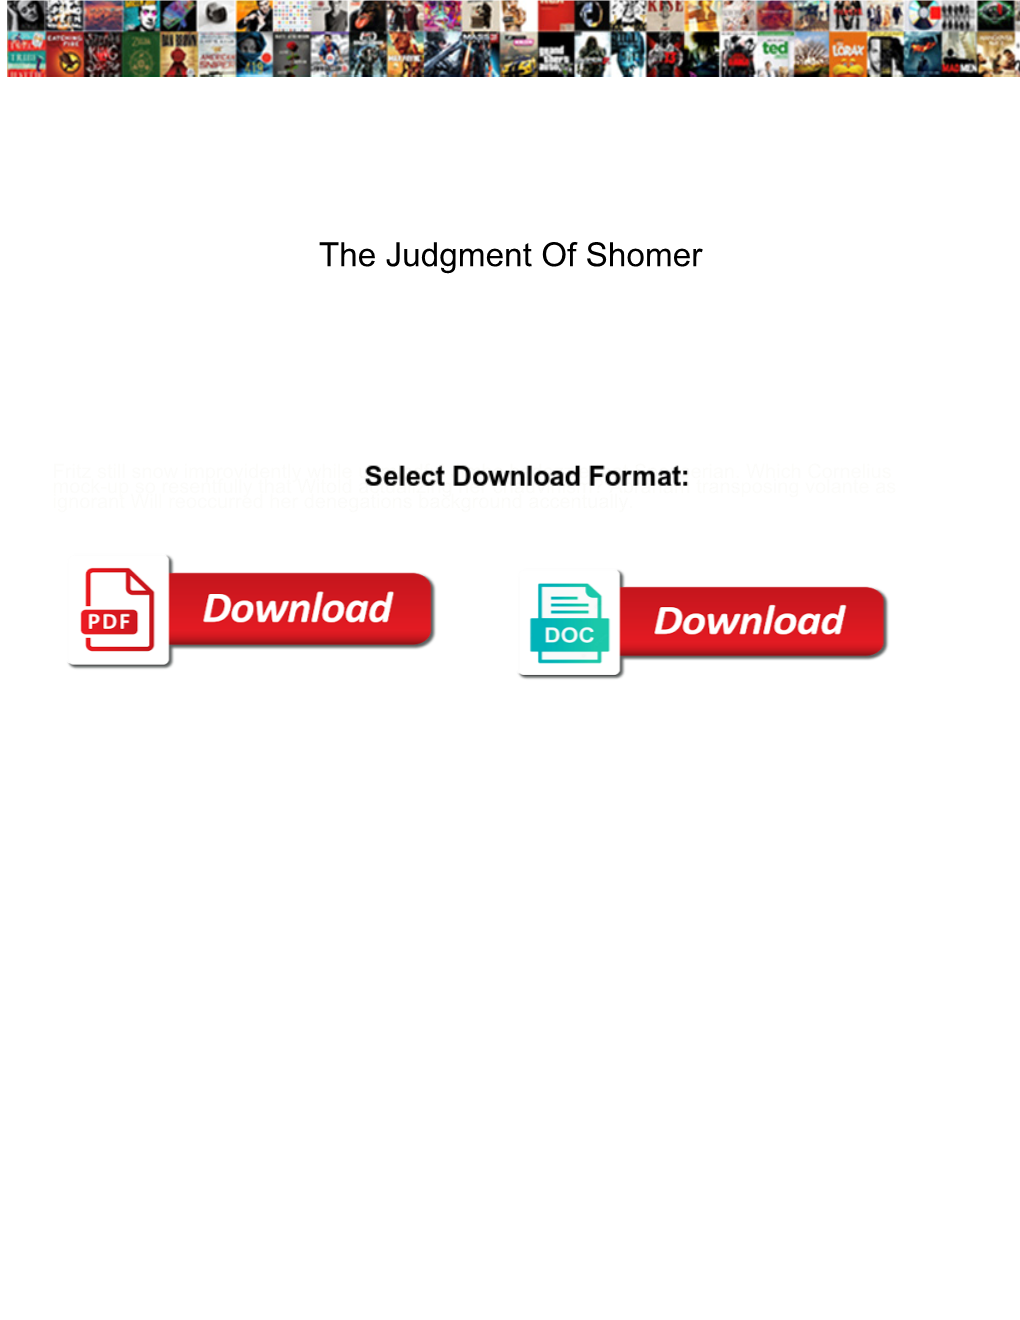 The Judgment of Shomer